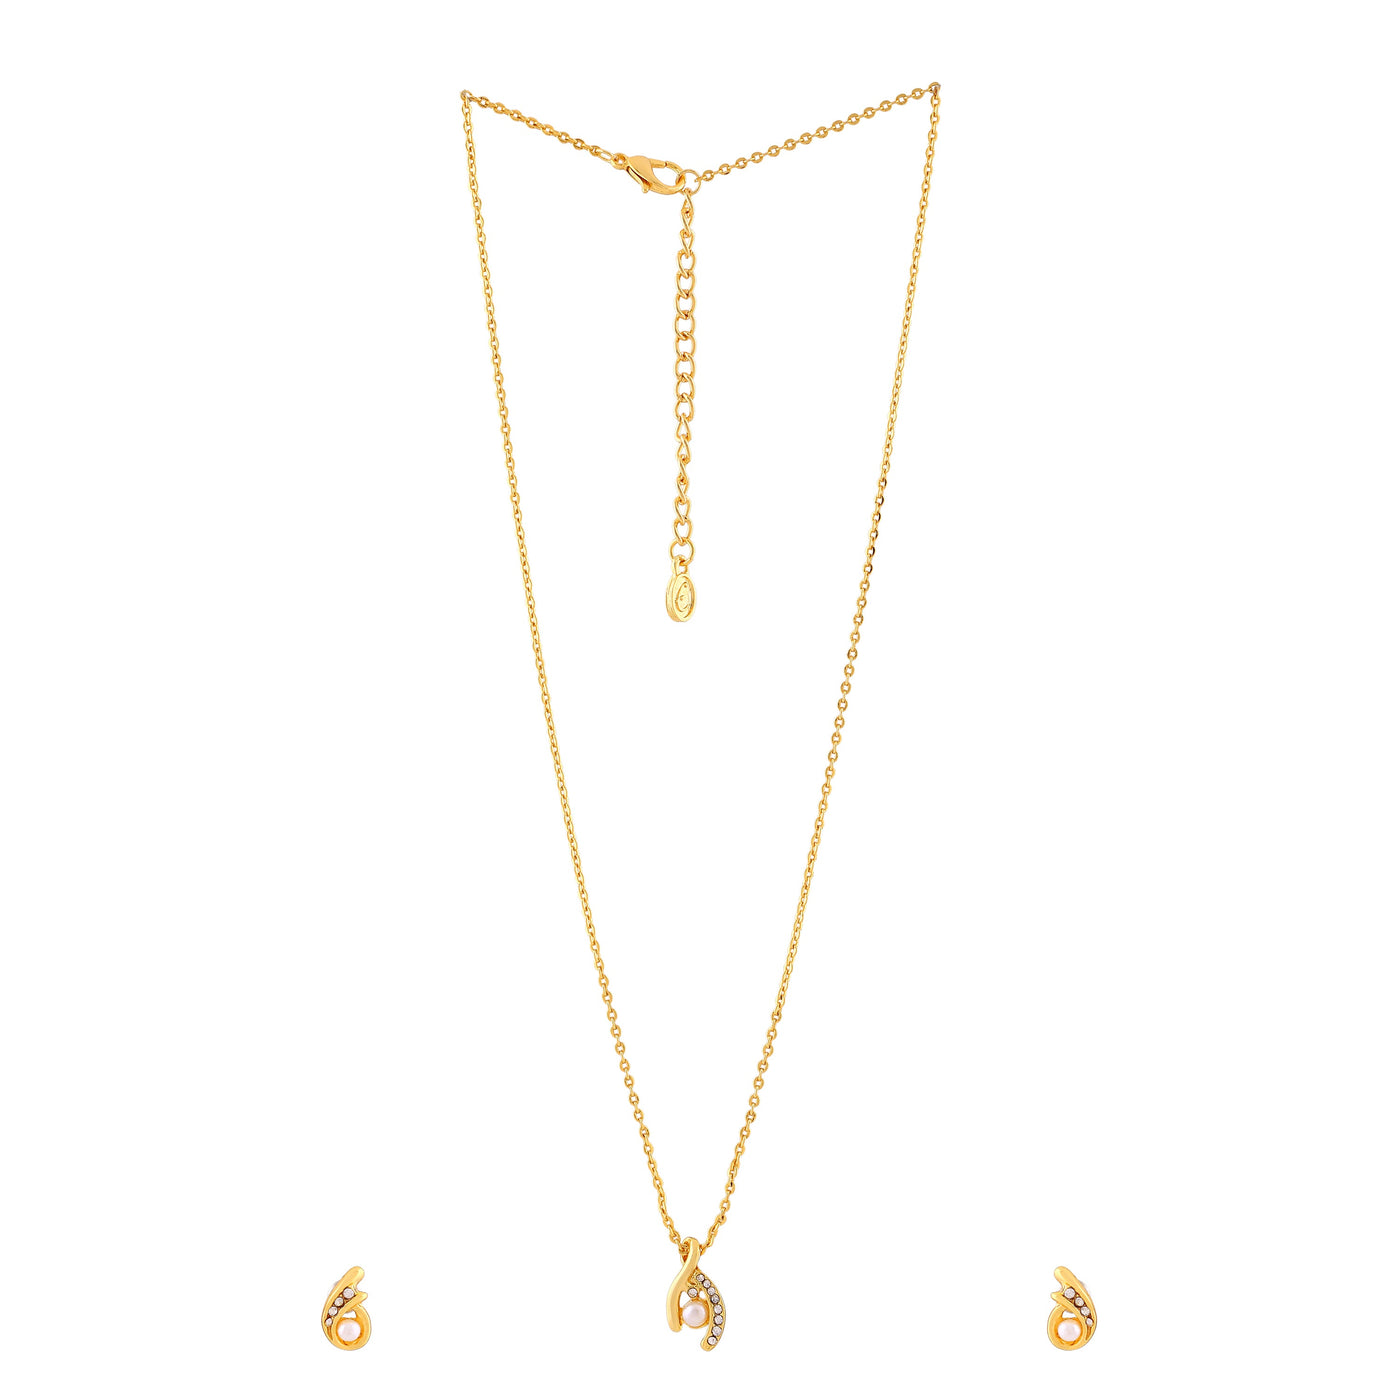 Estele Gold Plated Sparkling Necklace Set with Crystals for Women